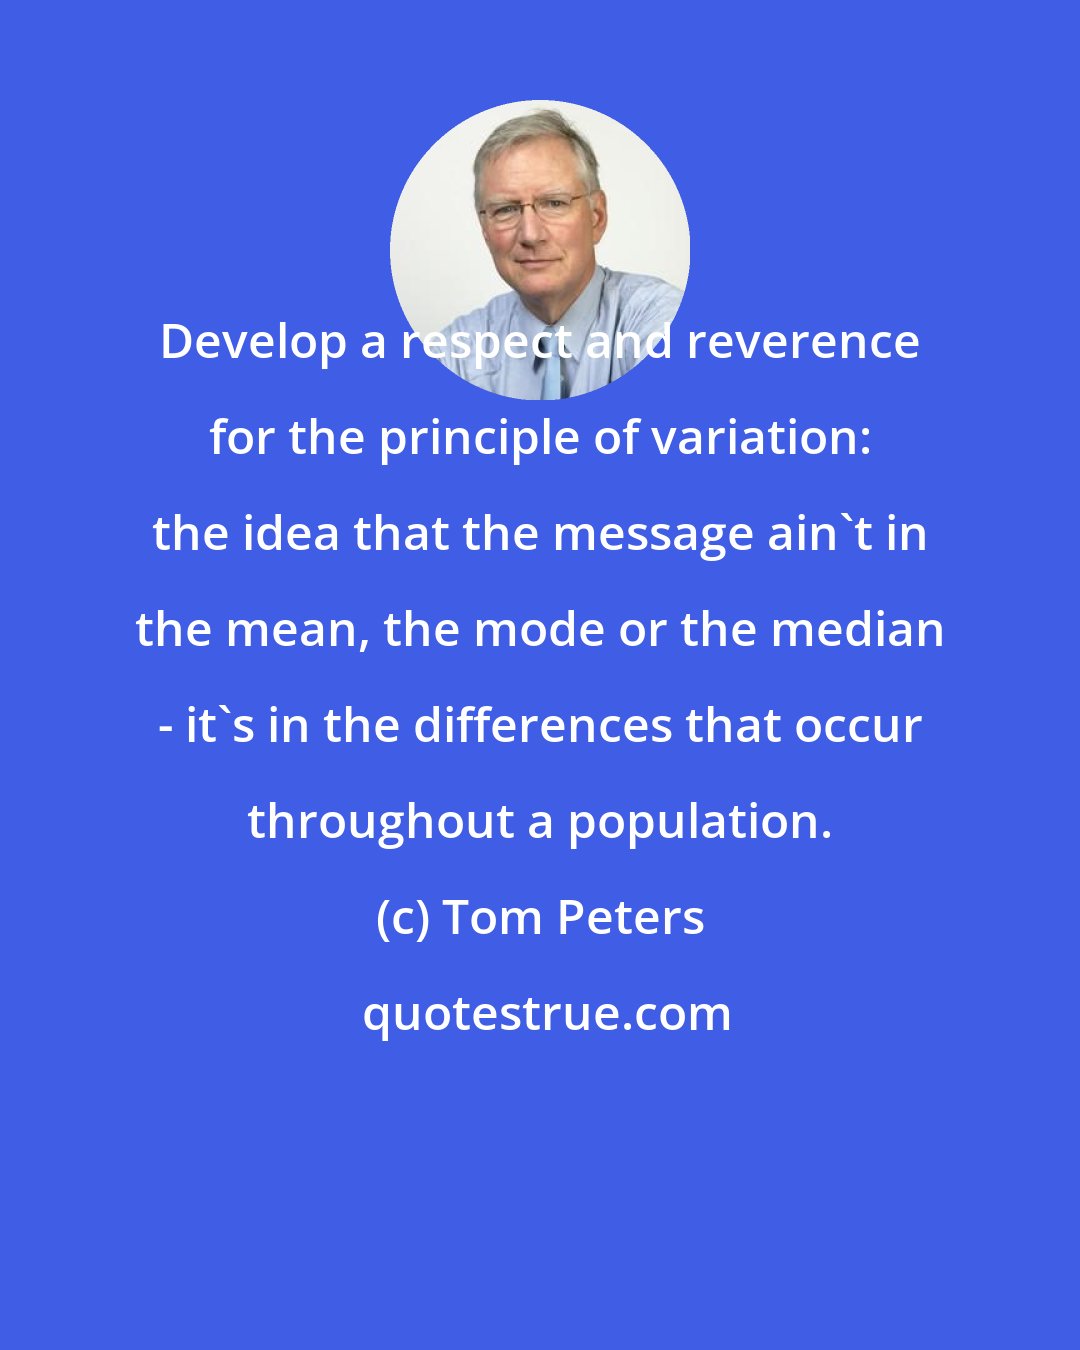 Tom Peters: Develop a respect and reverence for the principle of variation: the idea that the message ain't in the mean, the mode or the median - it's in the differences that occur throughout a population.